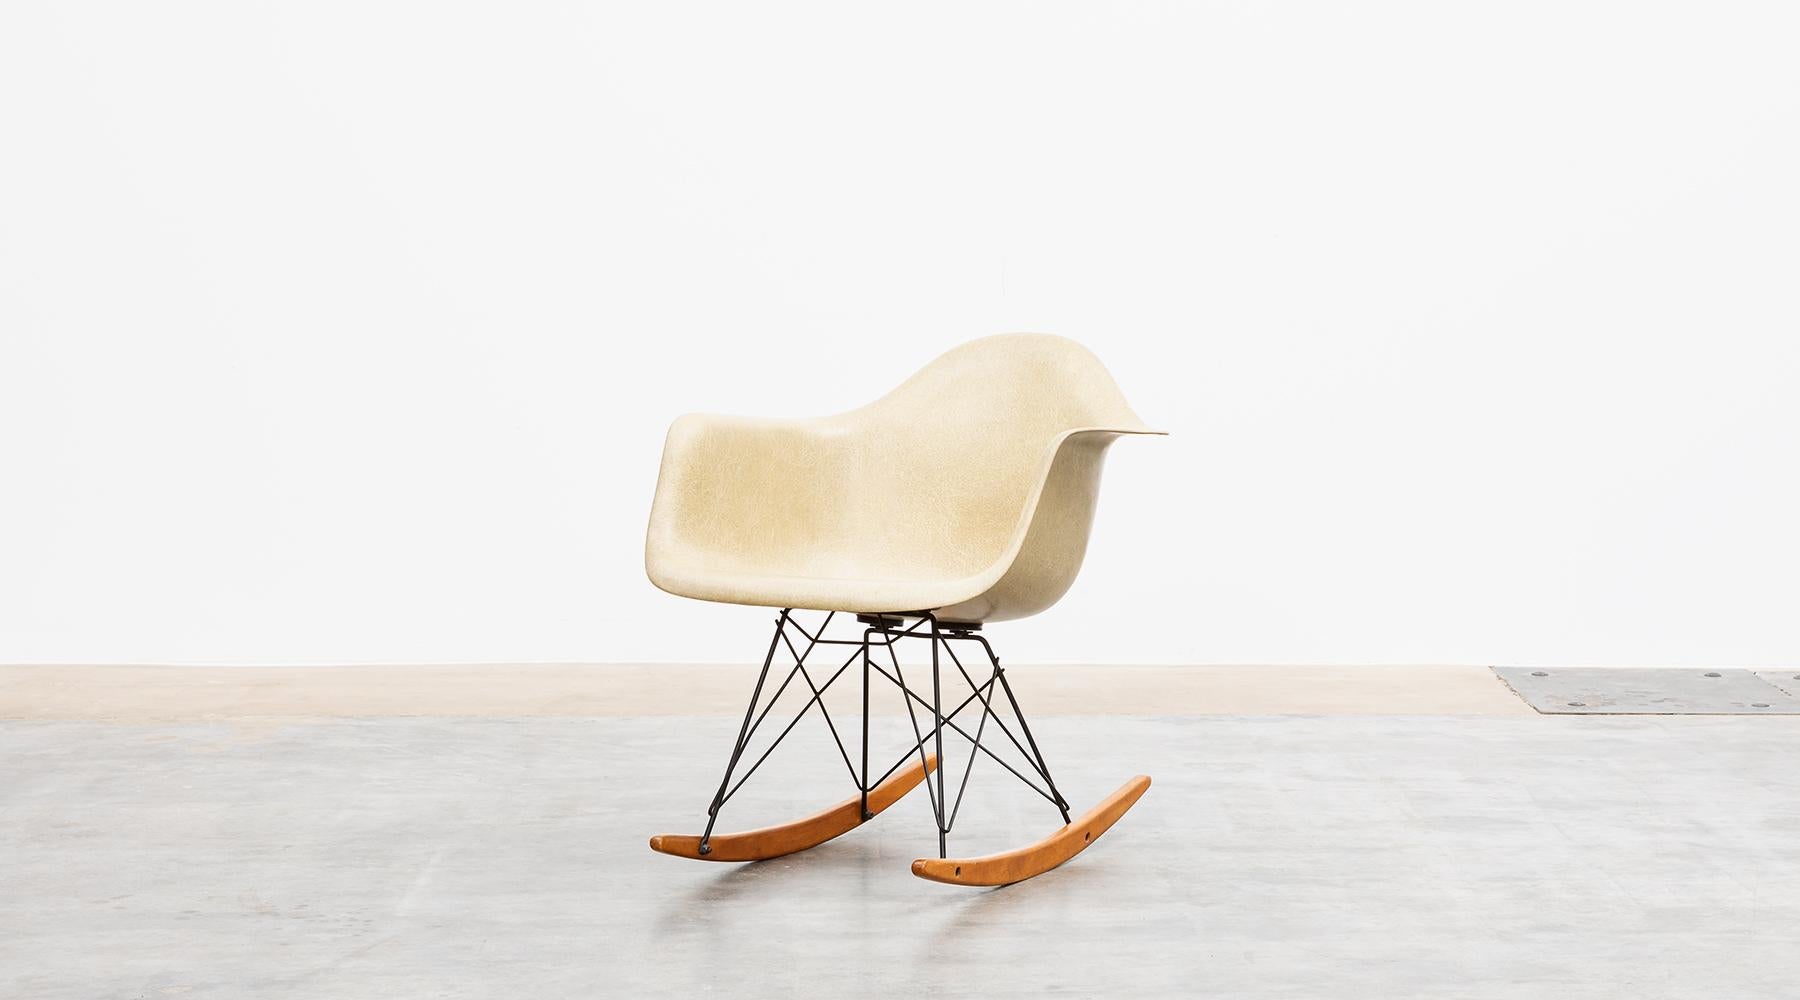 Rocking chair by Charles & Ray Eames, fiberglass shell and birch, USA, 1948

RAR rocking chair designed by famous couple Charles and Ray Eames. This is an early example with beautiful parchment color fiberglass shell that goes into a warm darker